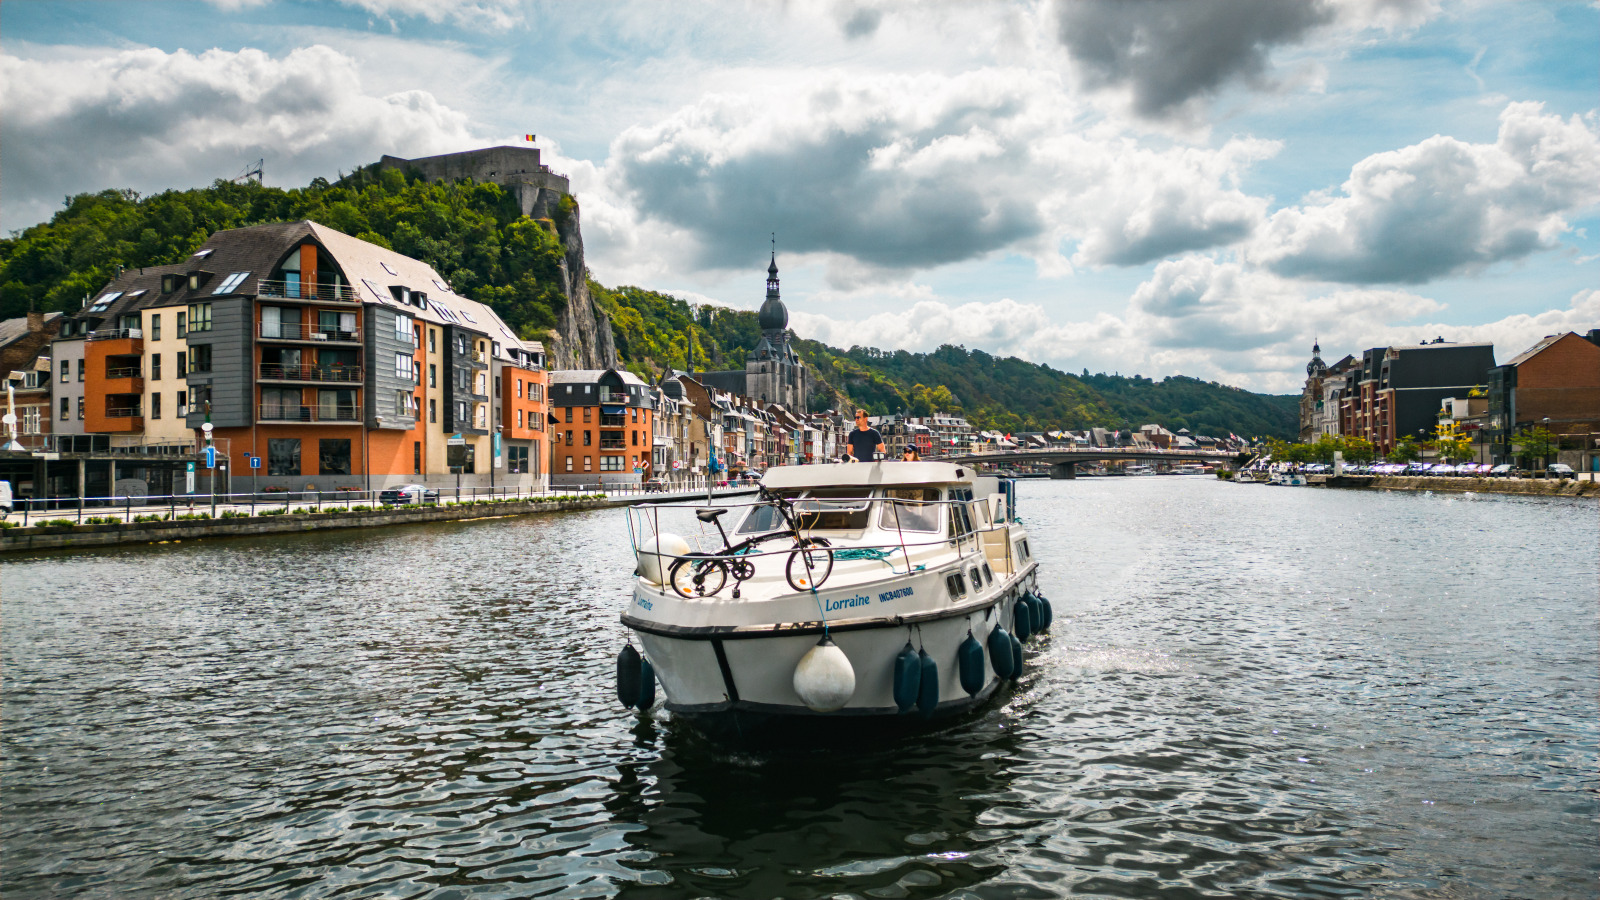 Narrowboat, no license required, on the Meuse river in Dinant